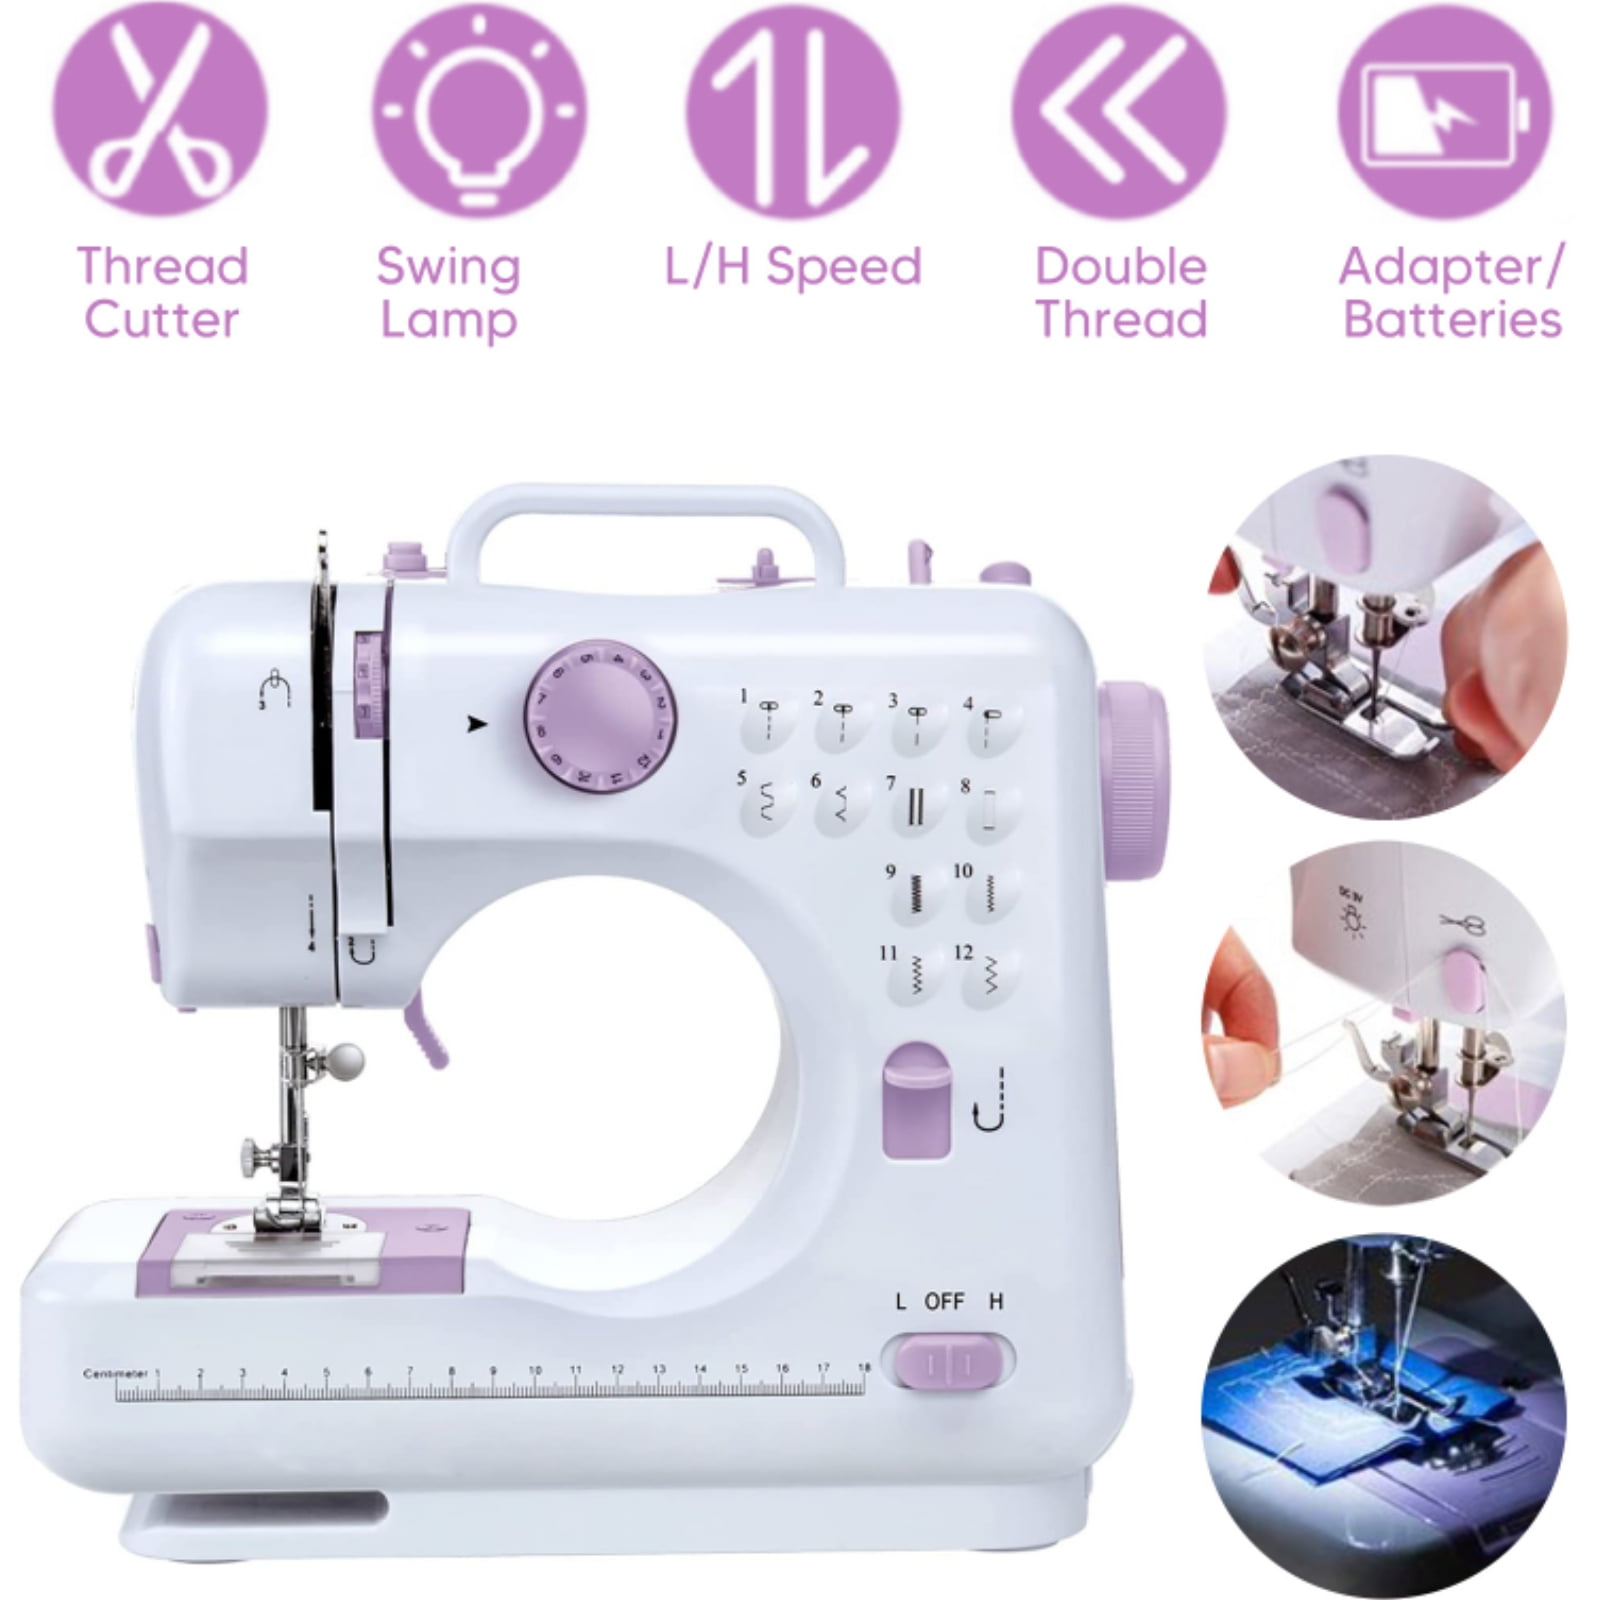 NEX™ Cute Pink Modern Crafting Sewing Machine with 12 Built-In Stitches